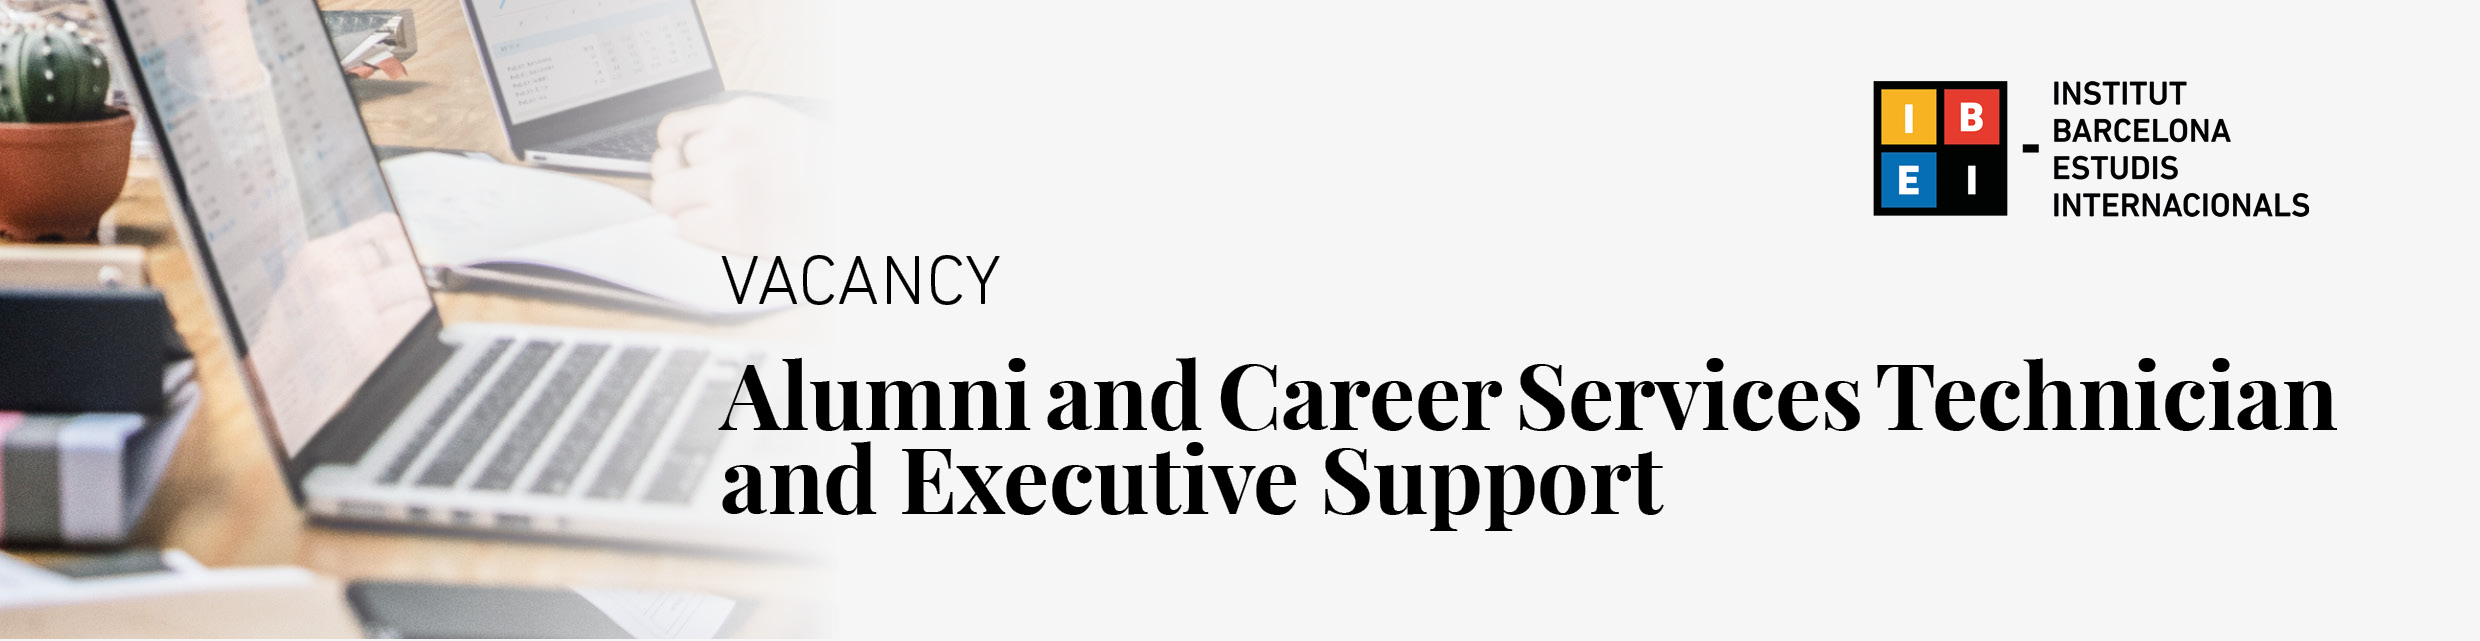 Vacancy | Alumni and Career Services Technician and Director’s Executive Support